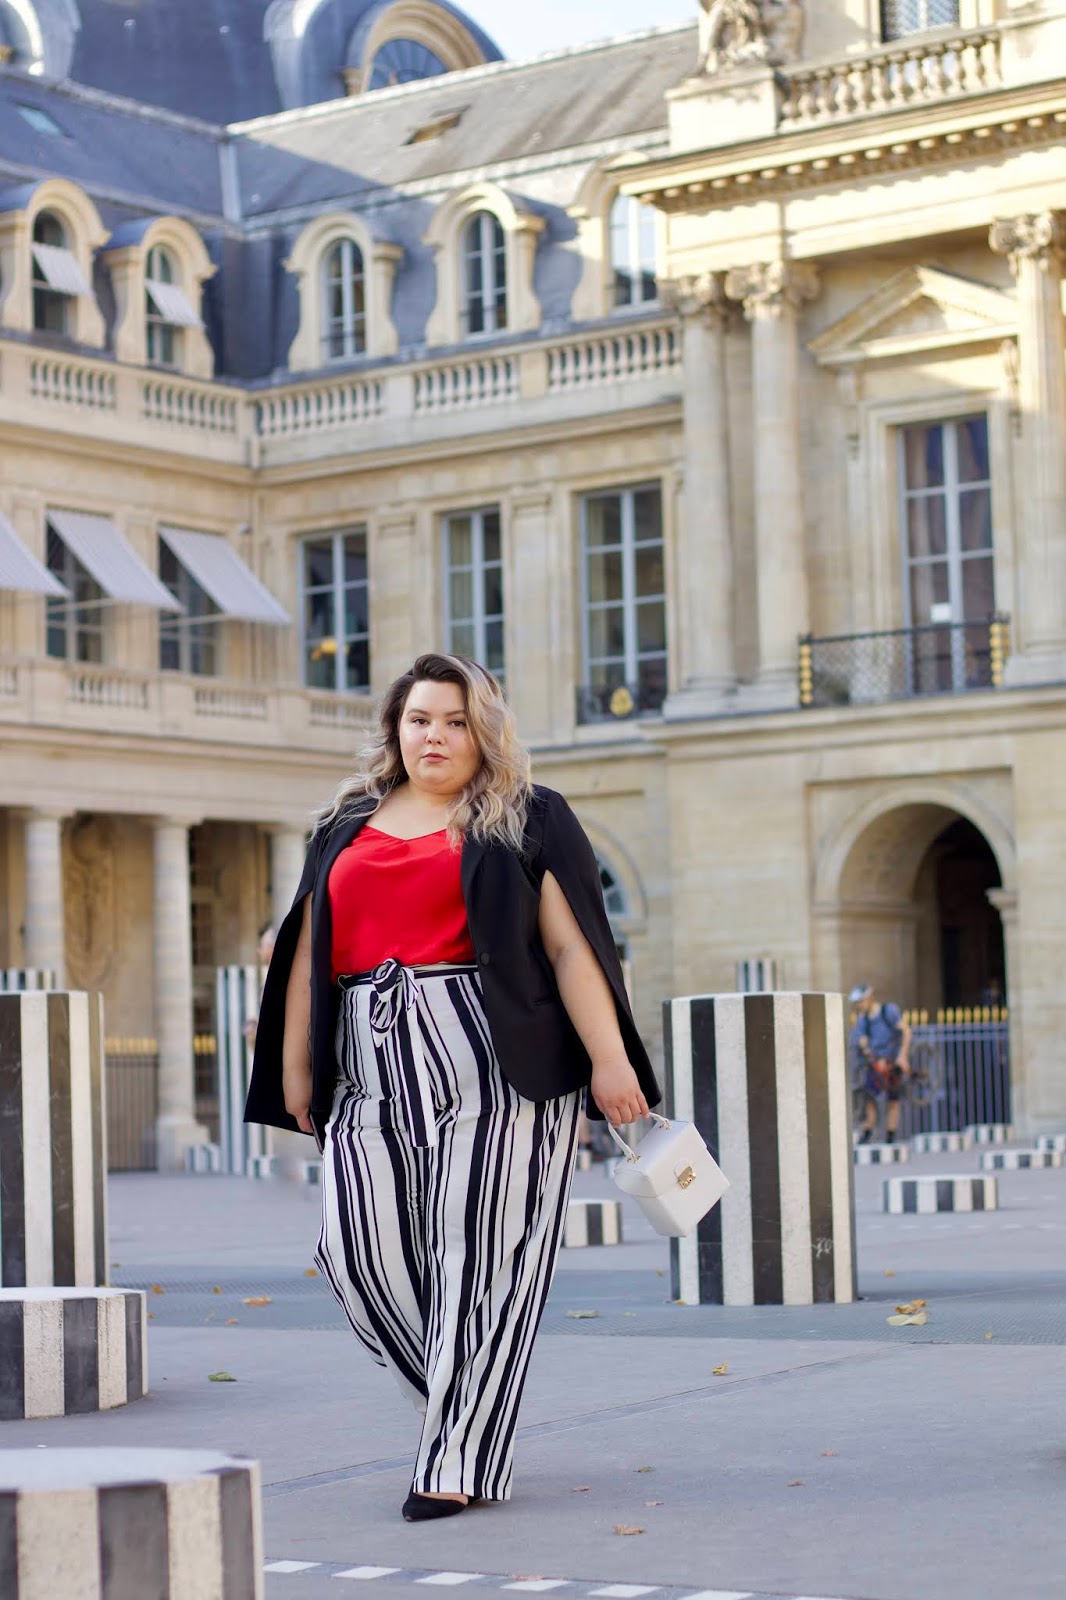 Chicago Plus Size Petite Fashion Blogger, influencer, YouTuber, and model Natalie Craig, of Natalie in the City, reviews Marée Pour Toi's Black and White Striped Pants, Red Washed Silk Charmeuse Tank, and Open Sleeve Blazer while visiting Paris, France and Les Deux Plateaux (also known as the Colonnes de Buren or stripe pillars) in Palais Royal.